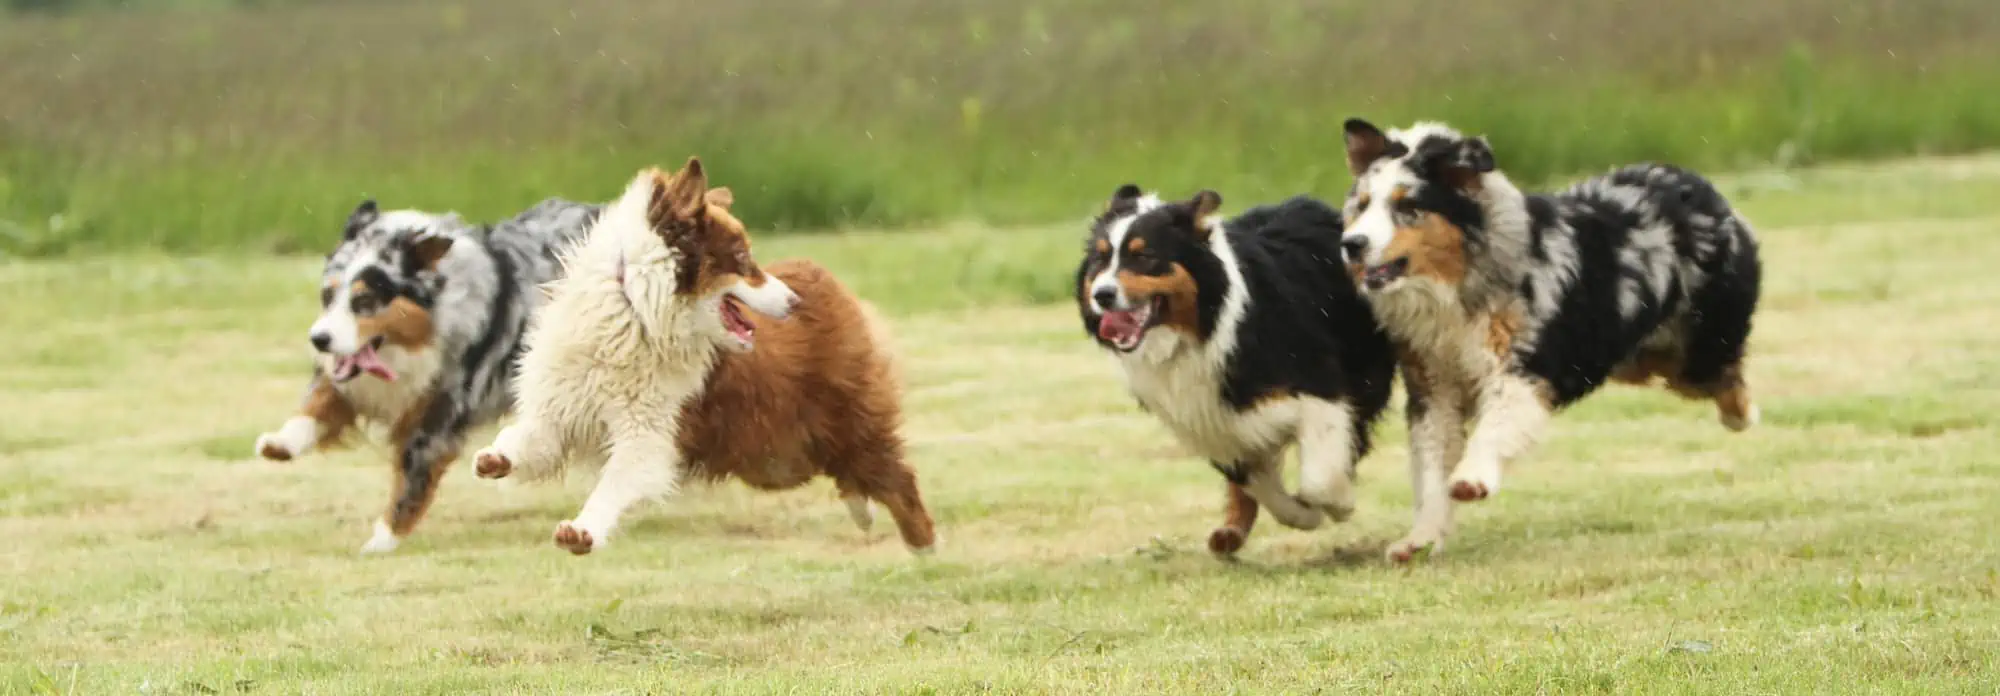 dogs running together in field